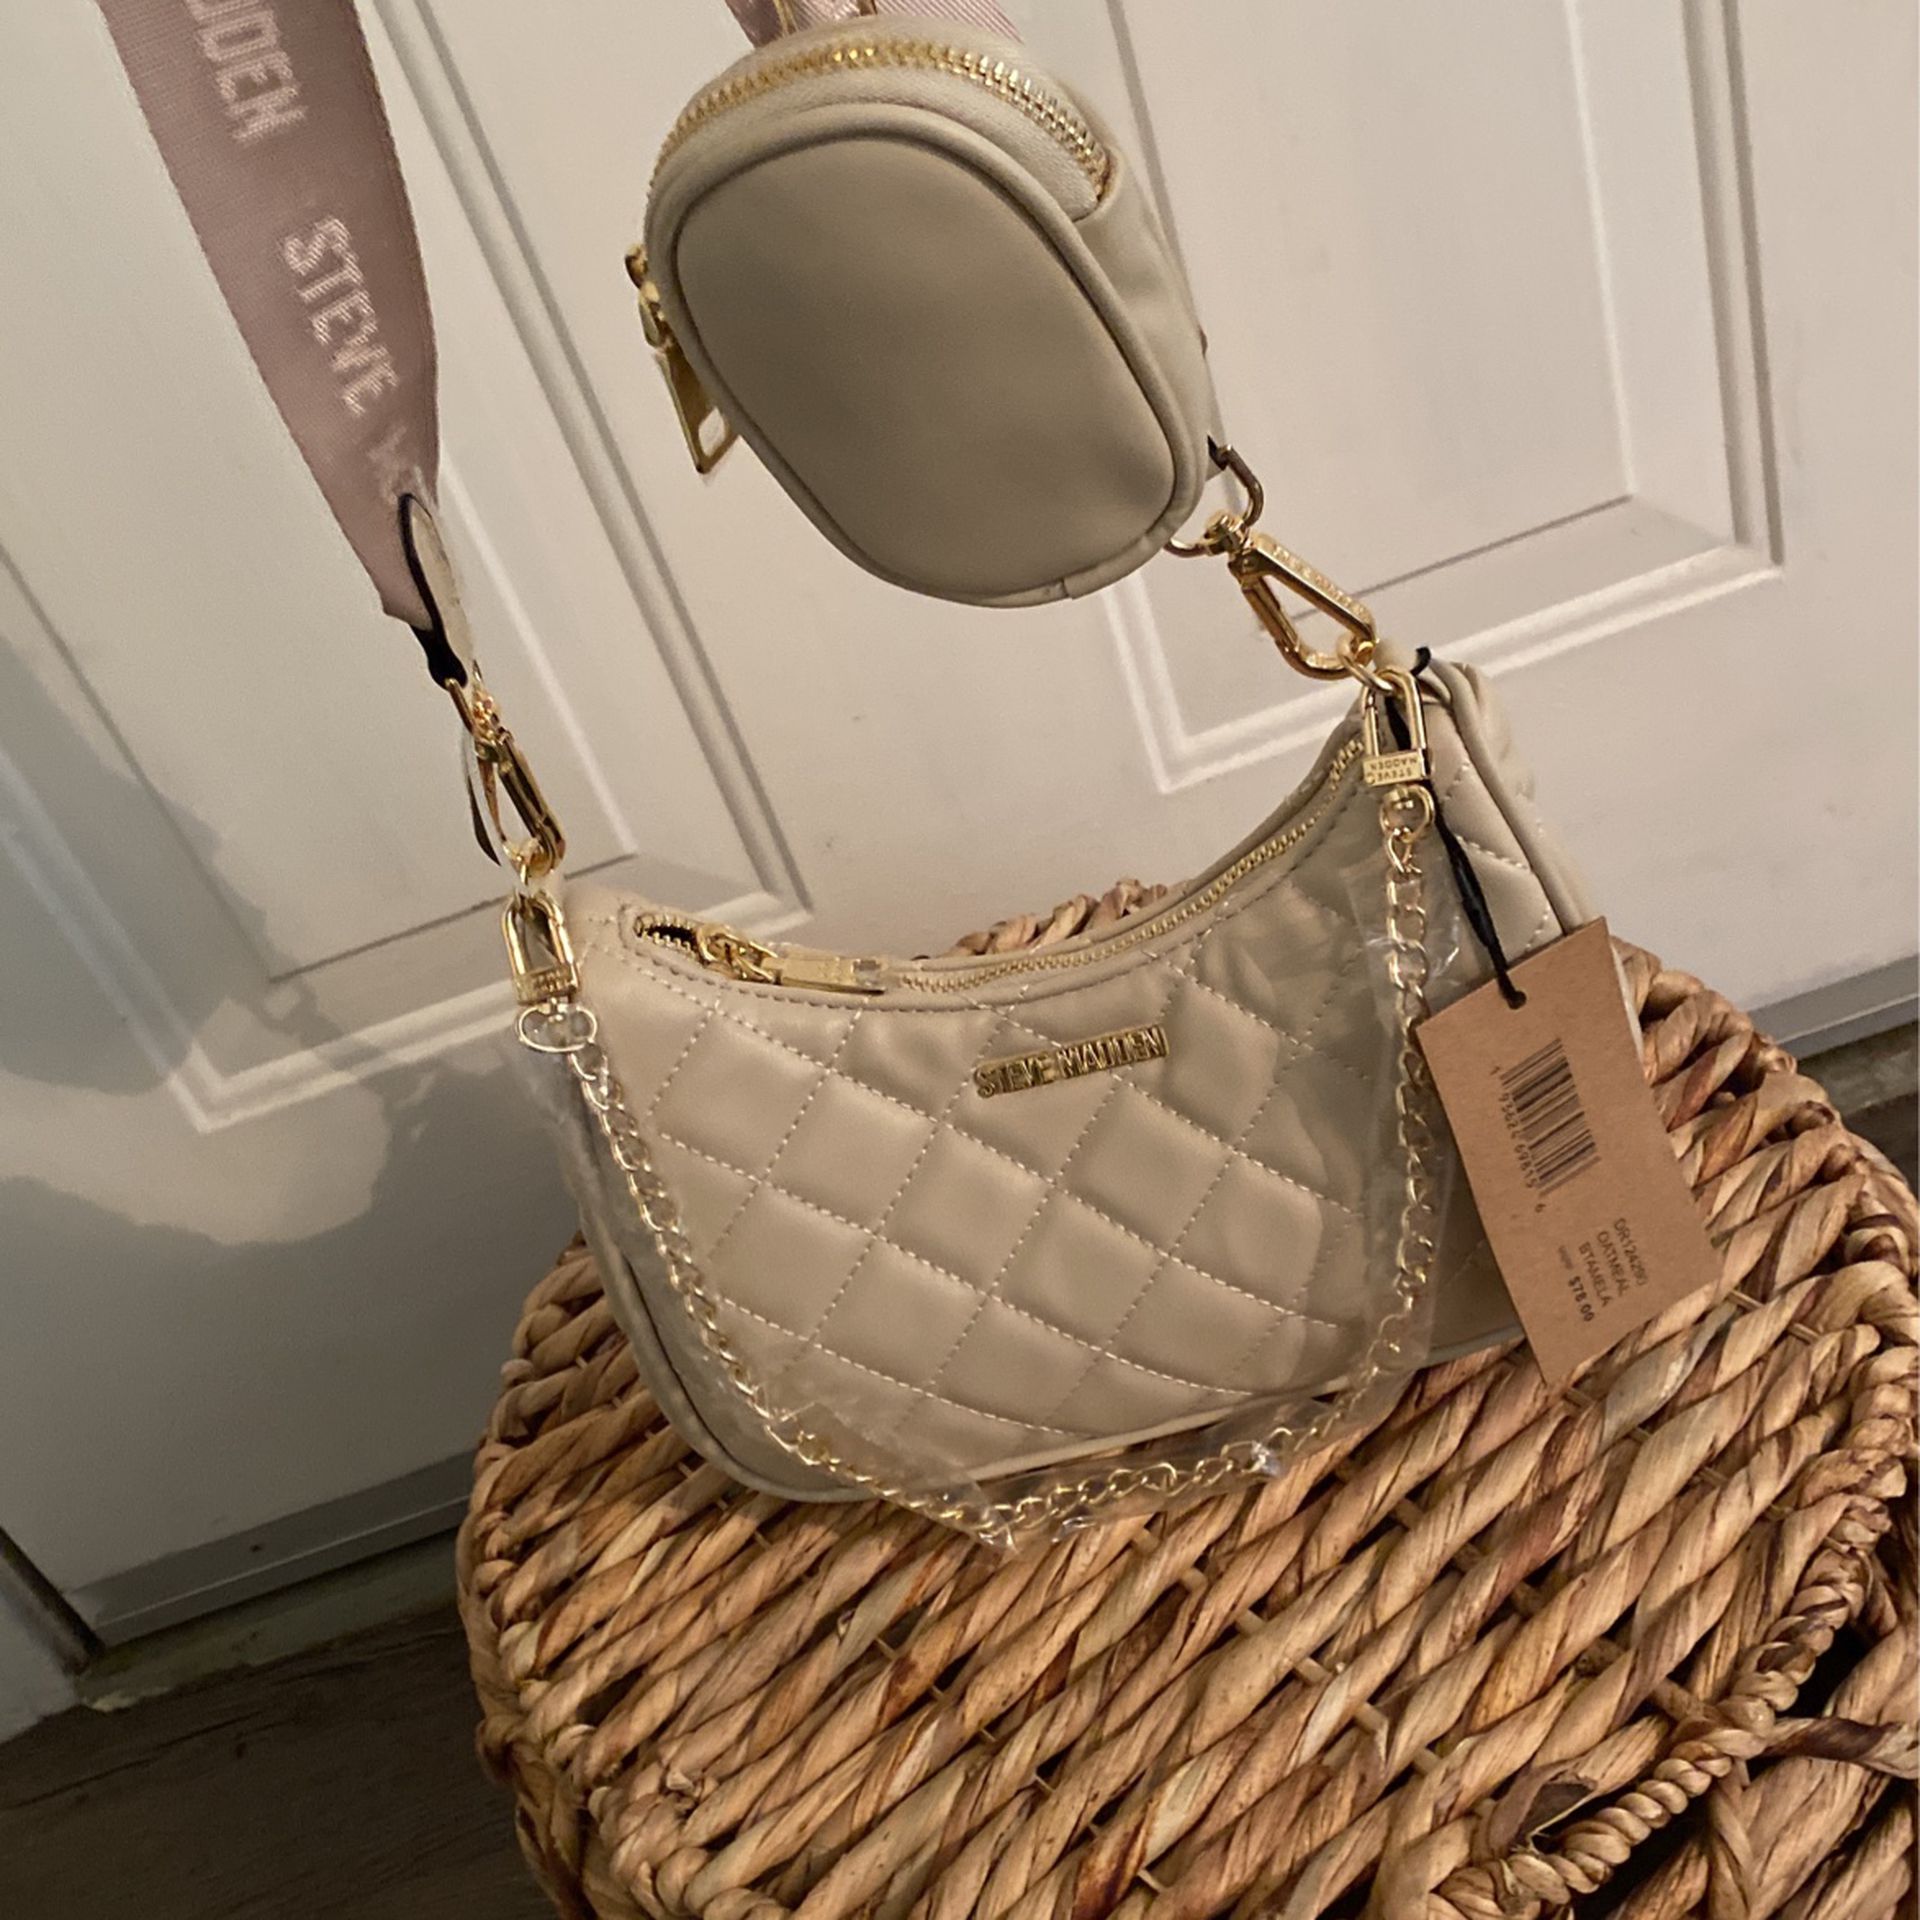 Steve Madden Duffel Bag NWT for Sale in Lake Forest, CA - OfferUp